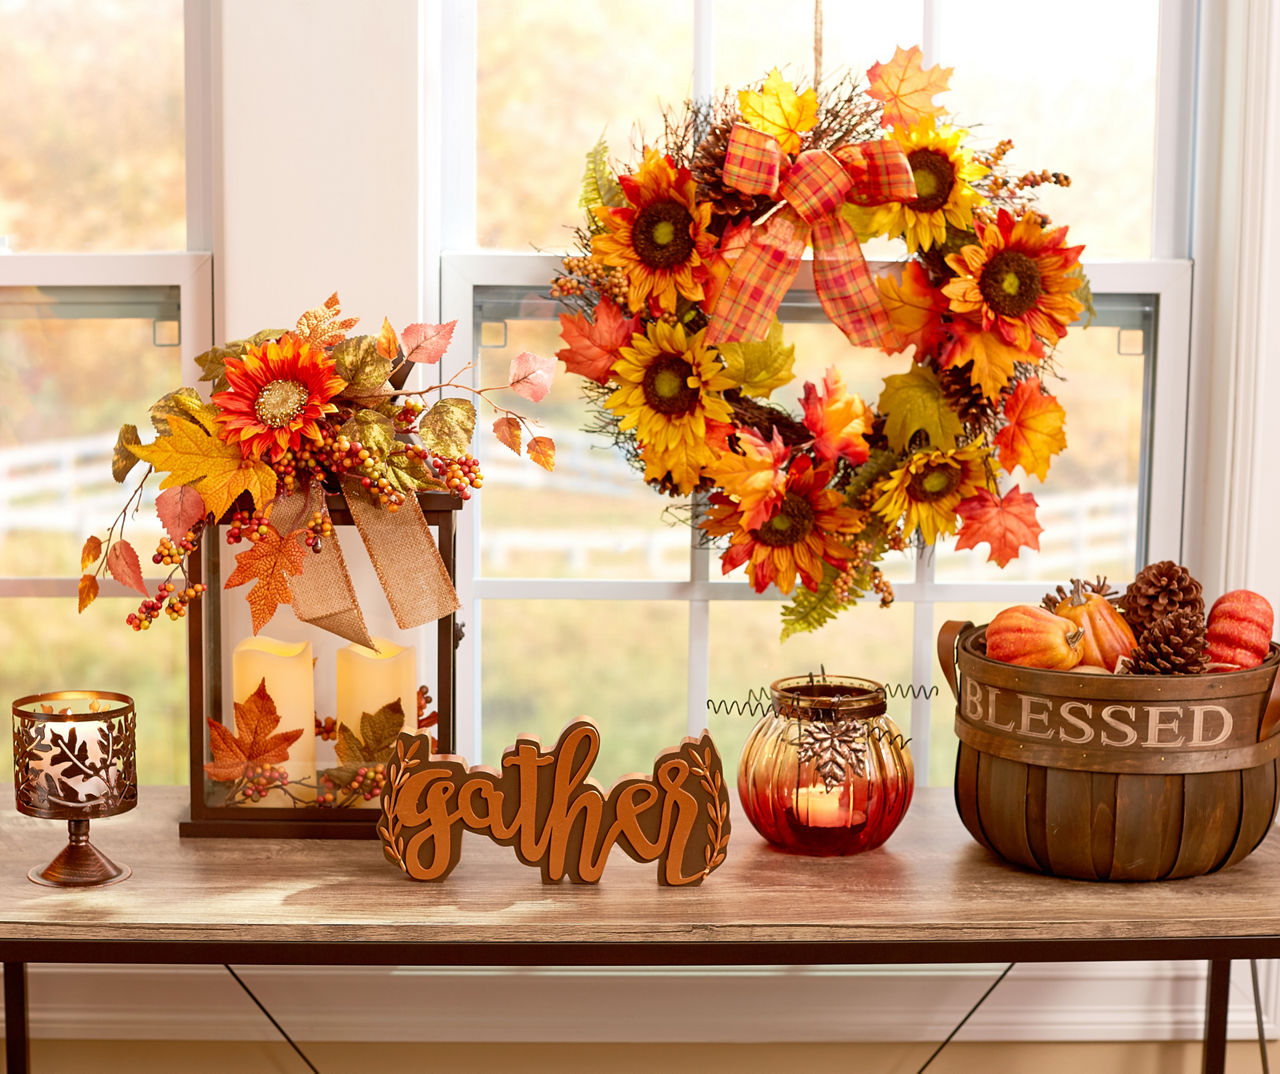 Classic Sunflowers & Leaves Fall Décor | Big Lots